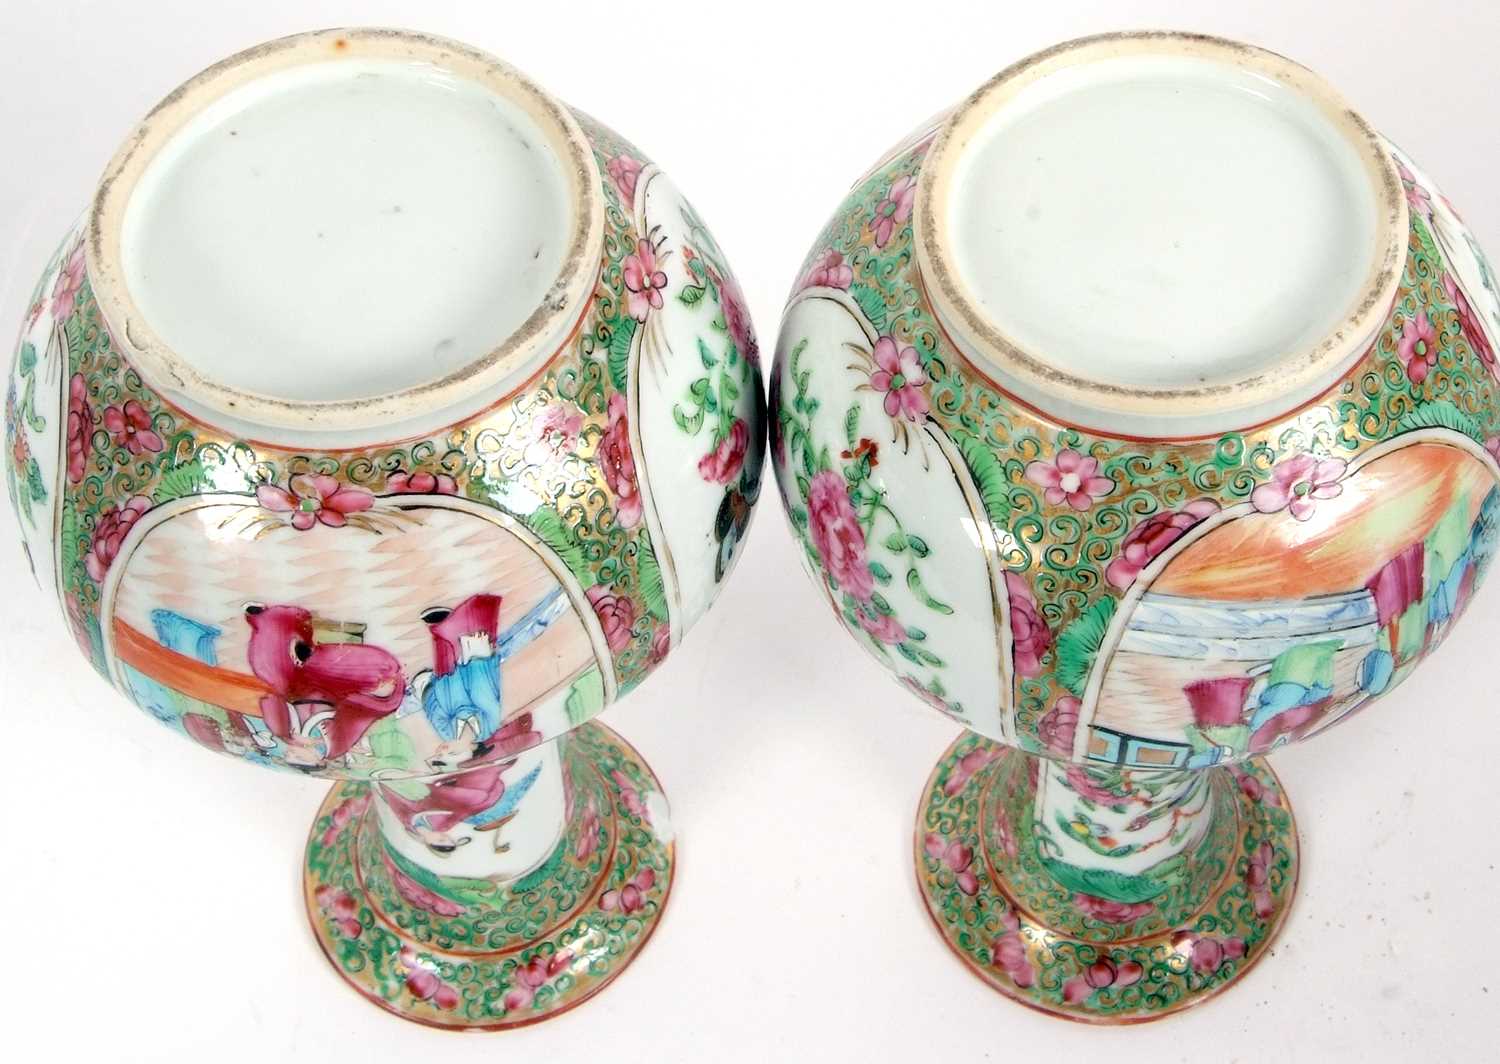 A pair of 19th Century Cantonese porcelain vases of baluster shape with typical designs of - Image 5 of 5